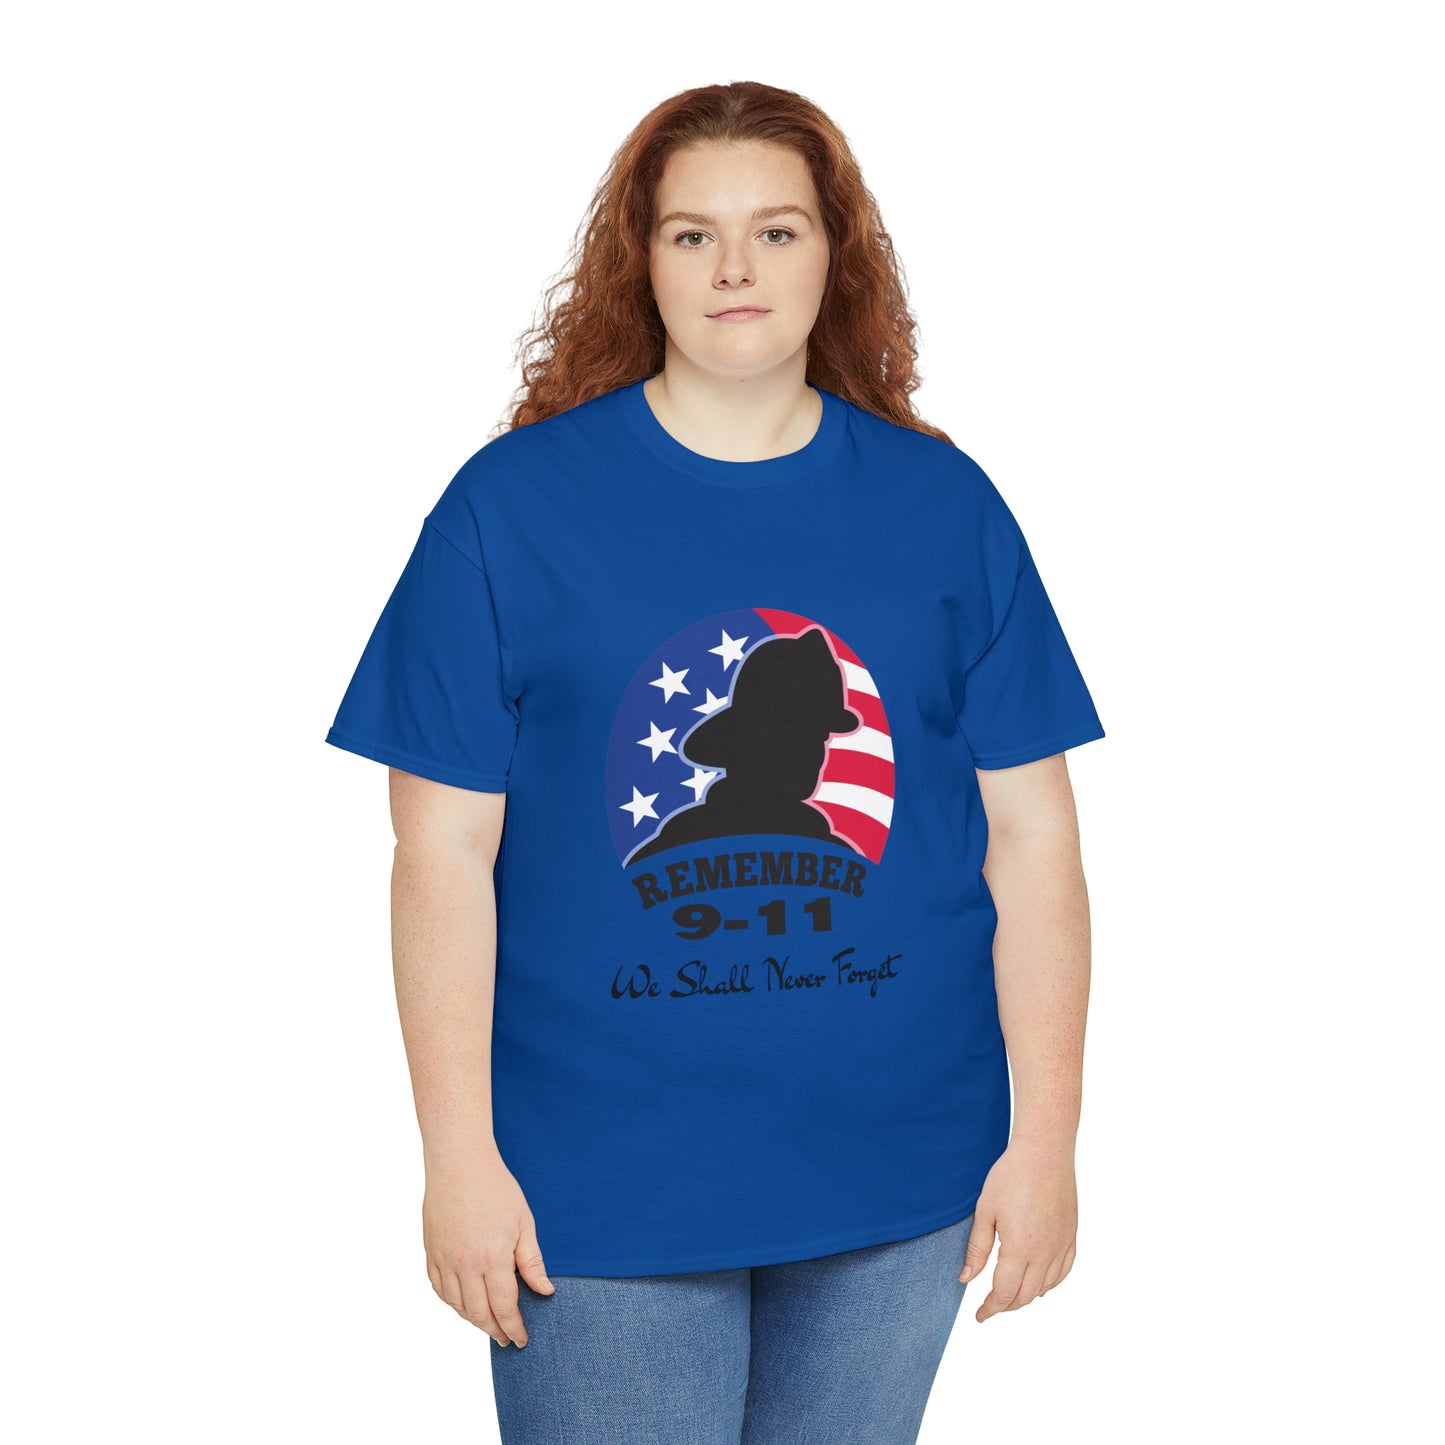 Unisex Heavy Cotton Tee- We Shall Never Forget 9/11